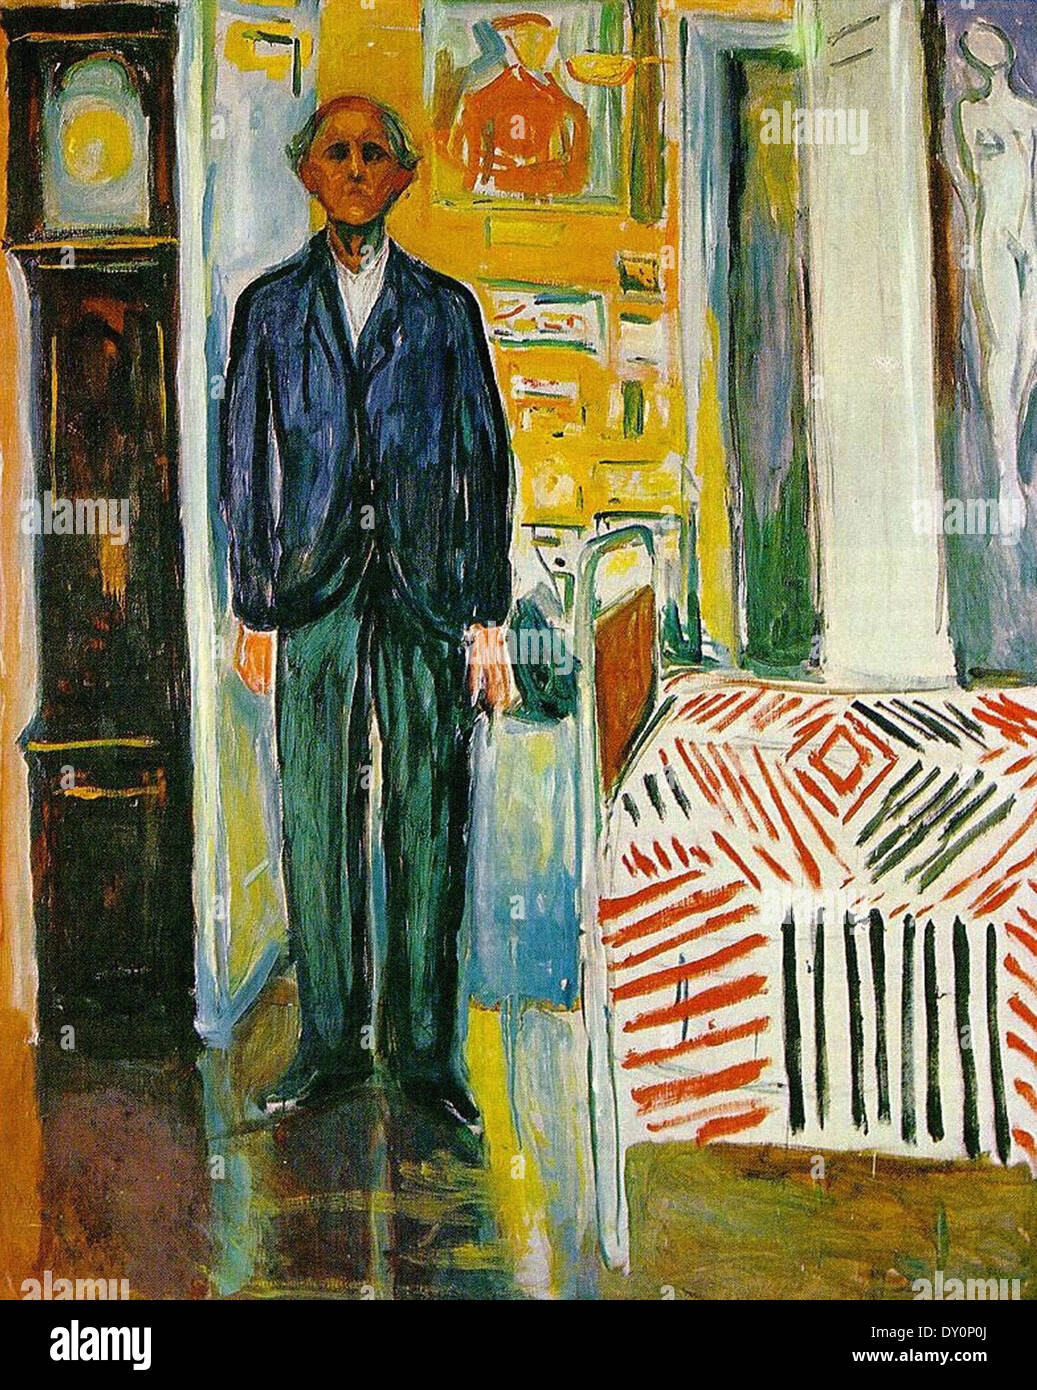 Edvard Munch Self Portrait Between the Clock and the Bed Stock Photo - Alamy